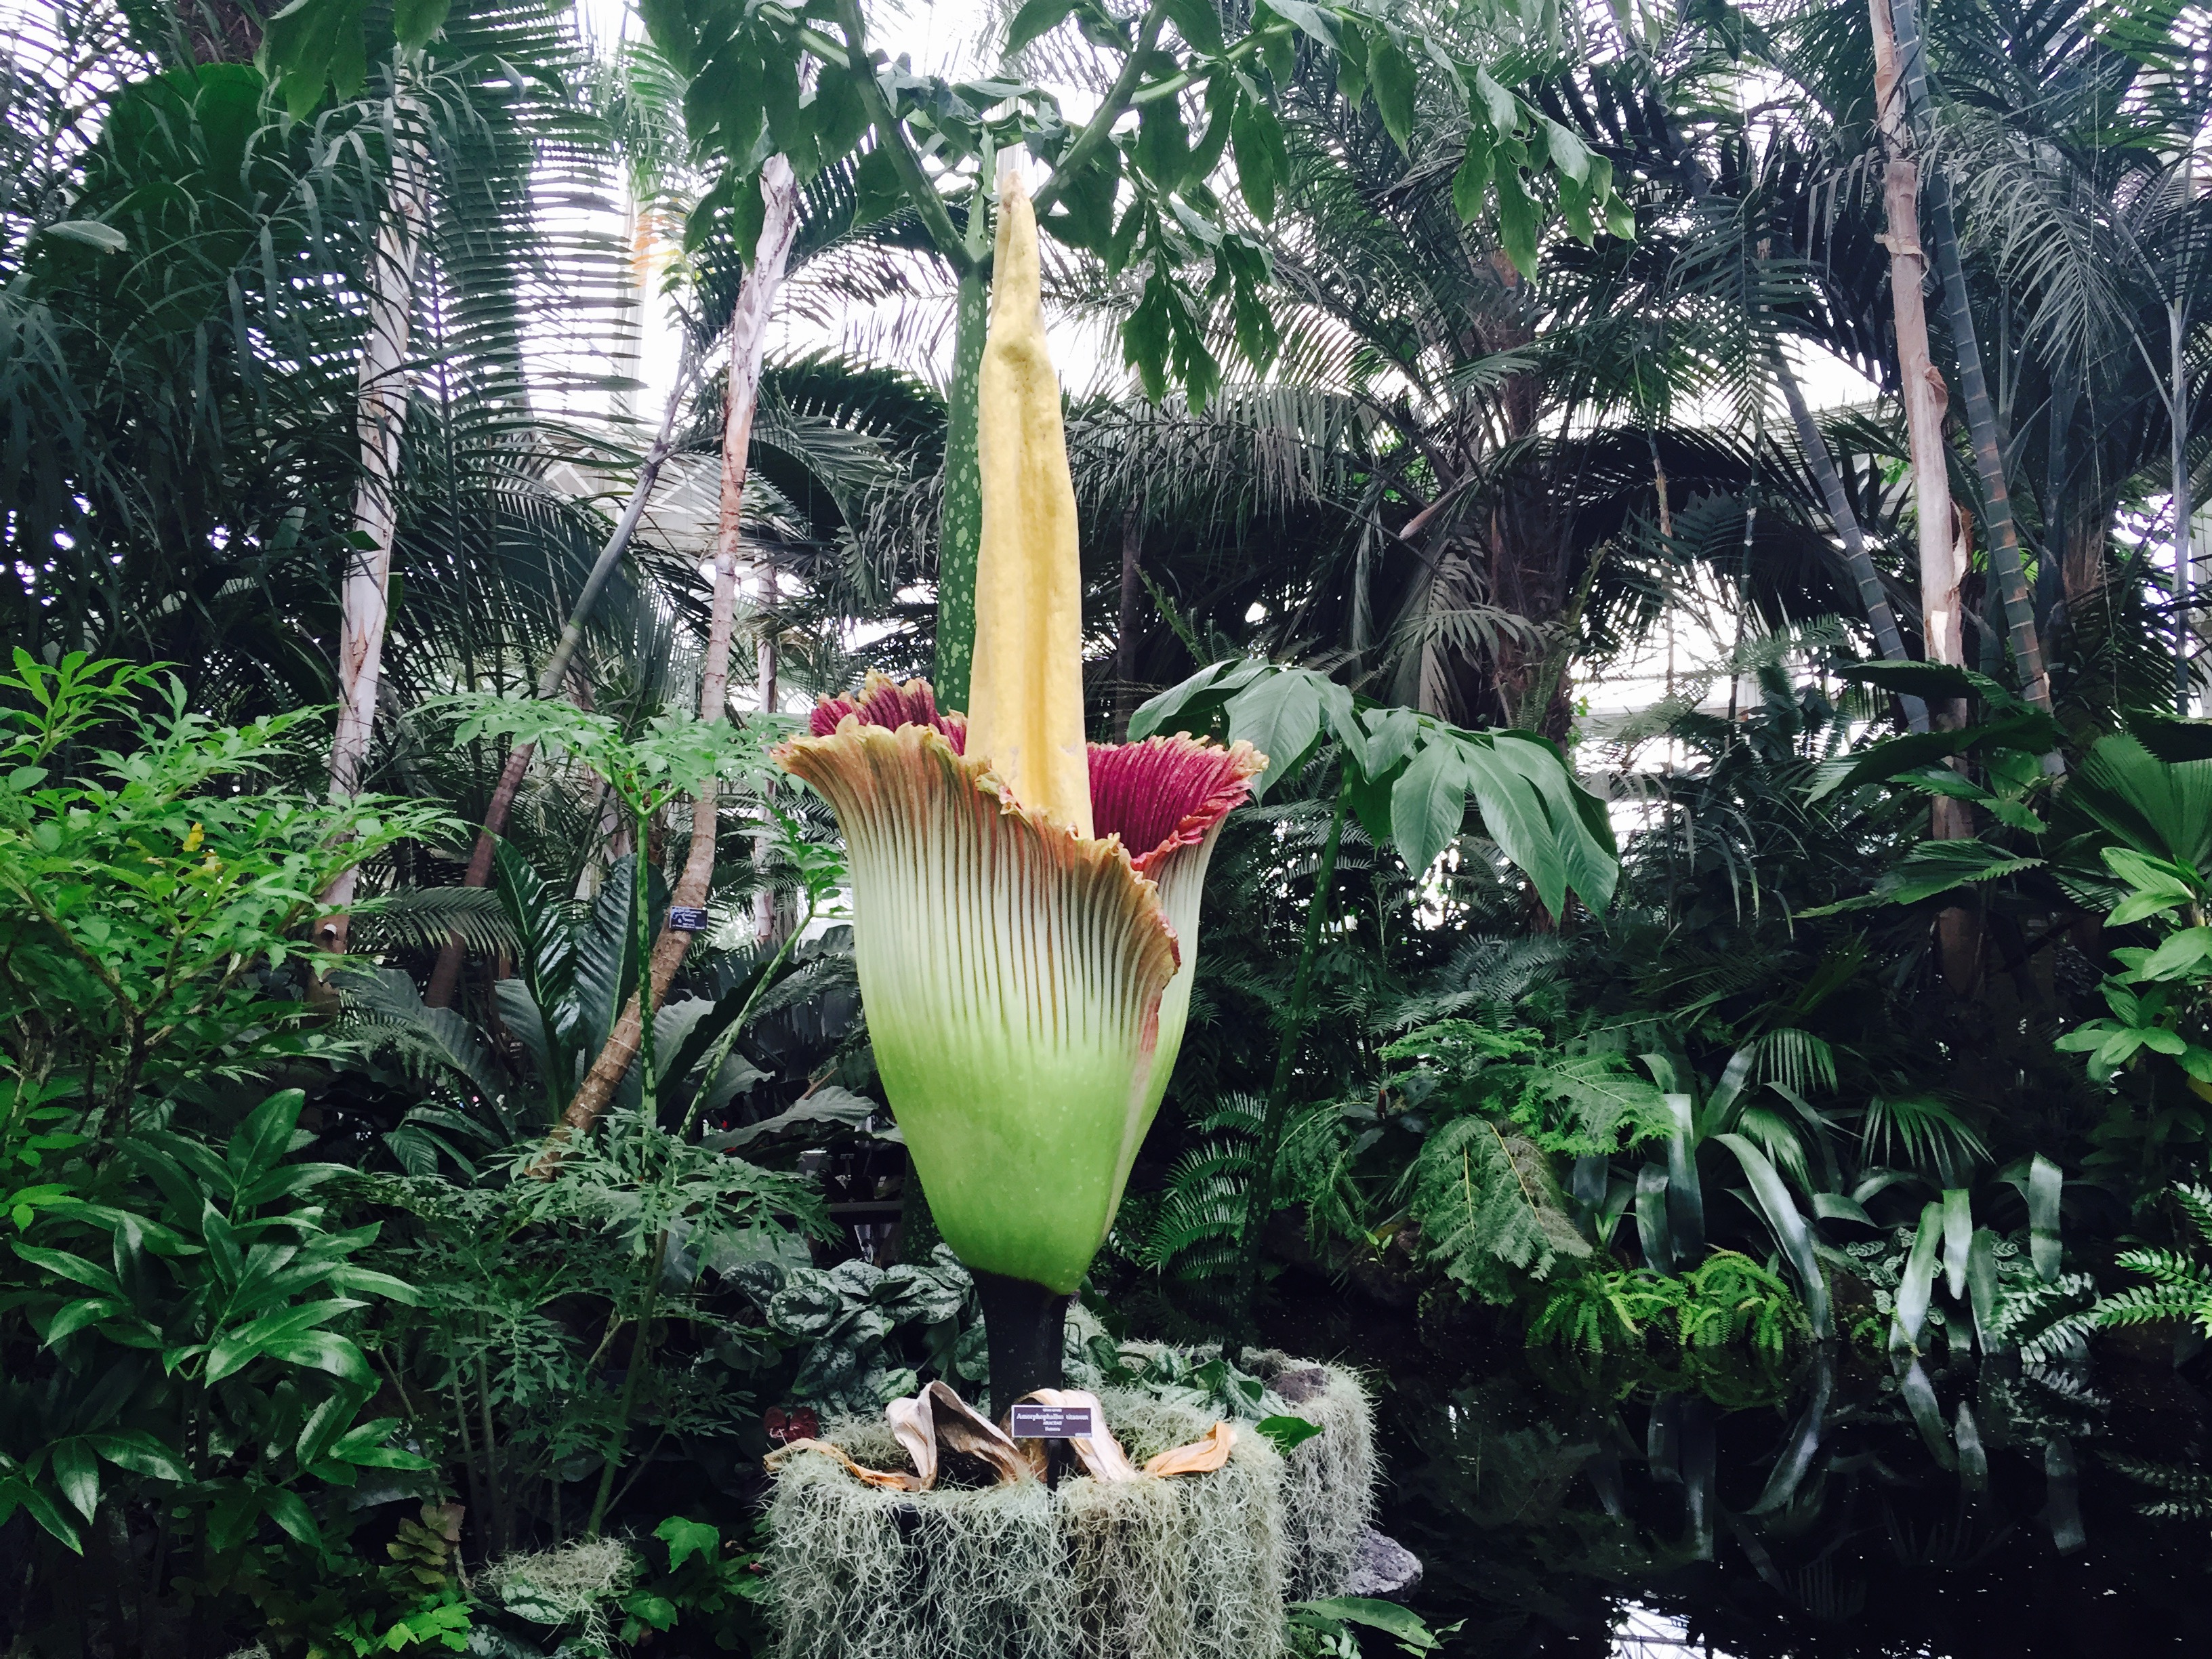 foul-smelling corpse flower blooms at new york botanical garden